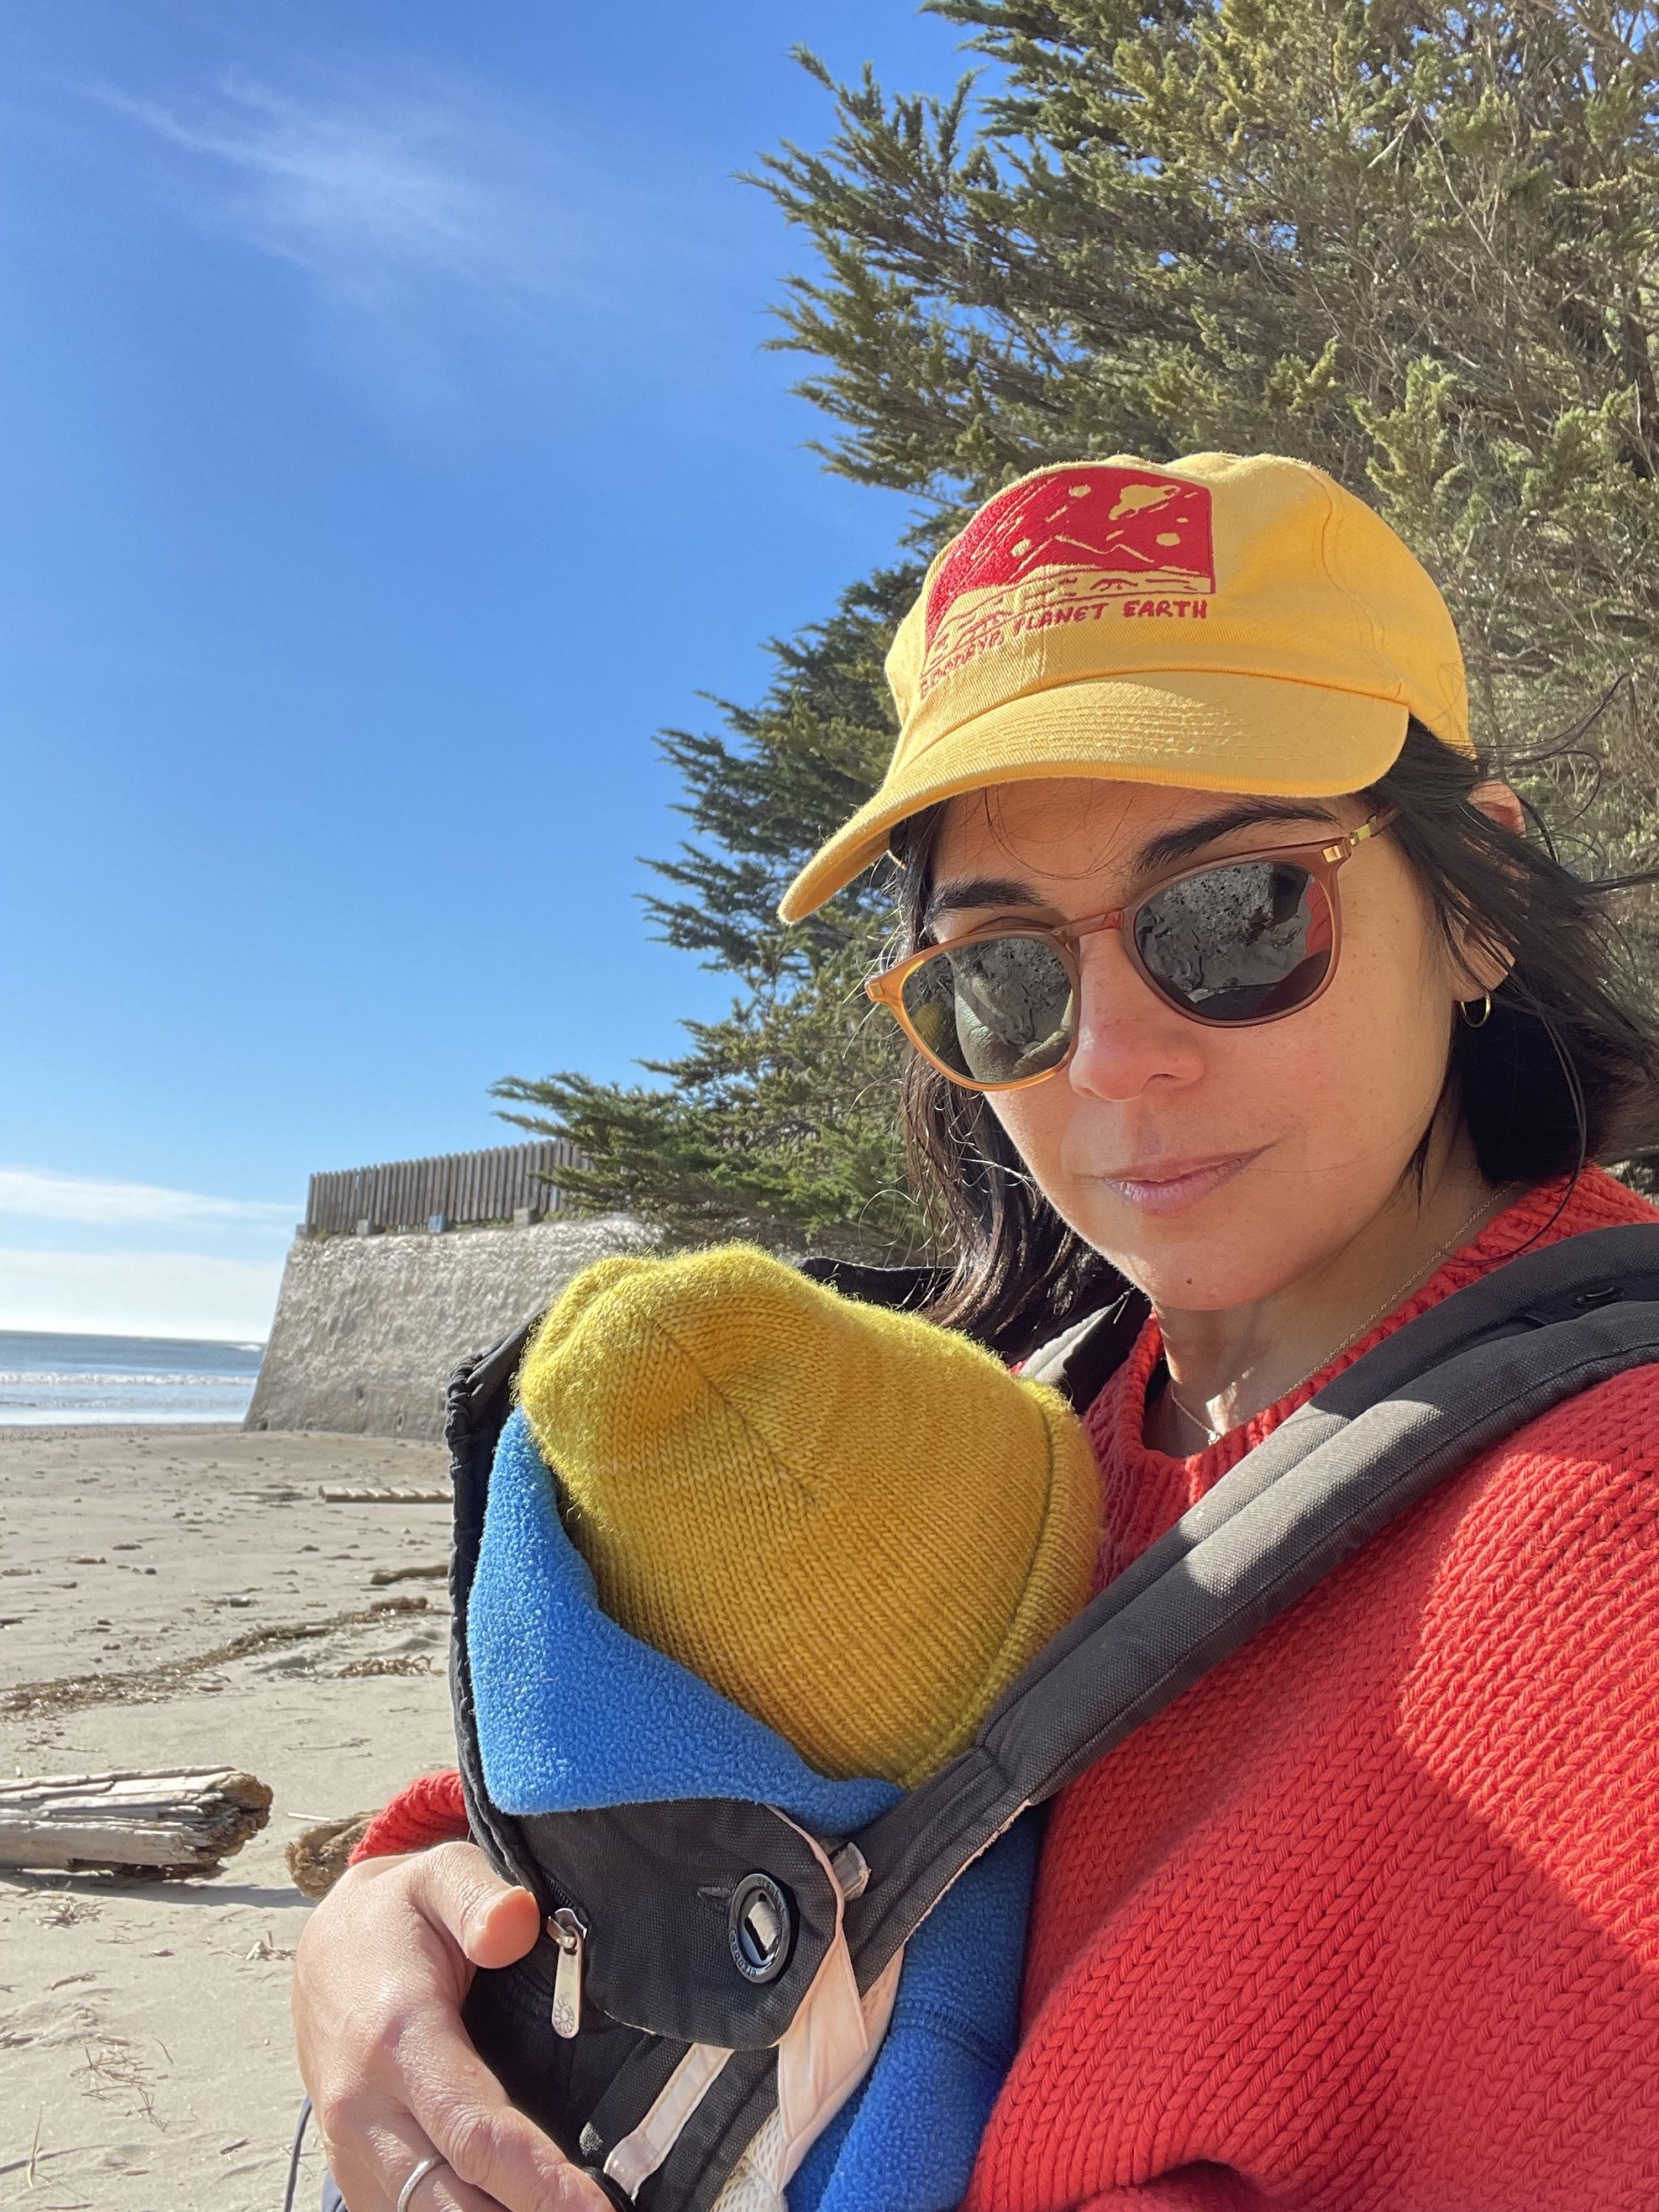 Corrine Fitzpatrick is sitting at the beach under the blue sky, wearing a red sweater, sunglasses, and yellow baseball cap. She is holding a baby wearing a mustard yellow beanie, who faces away from the camera and towards Corrine.